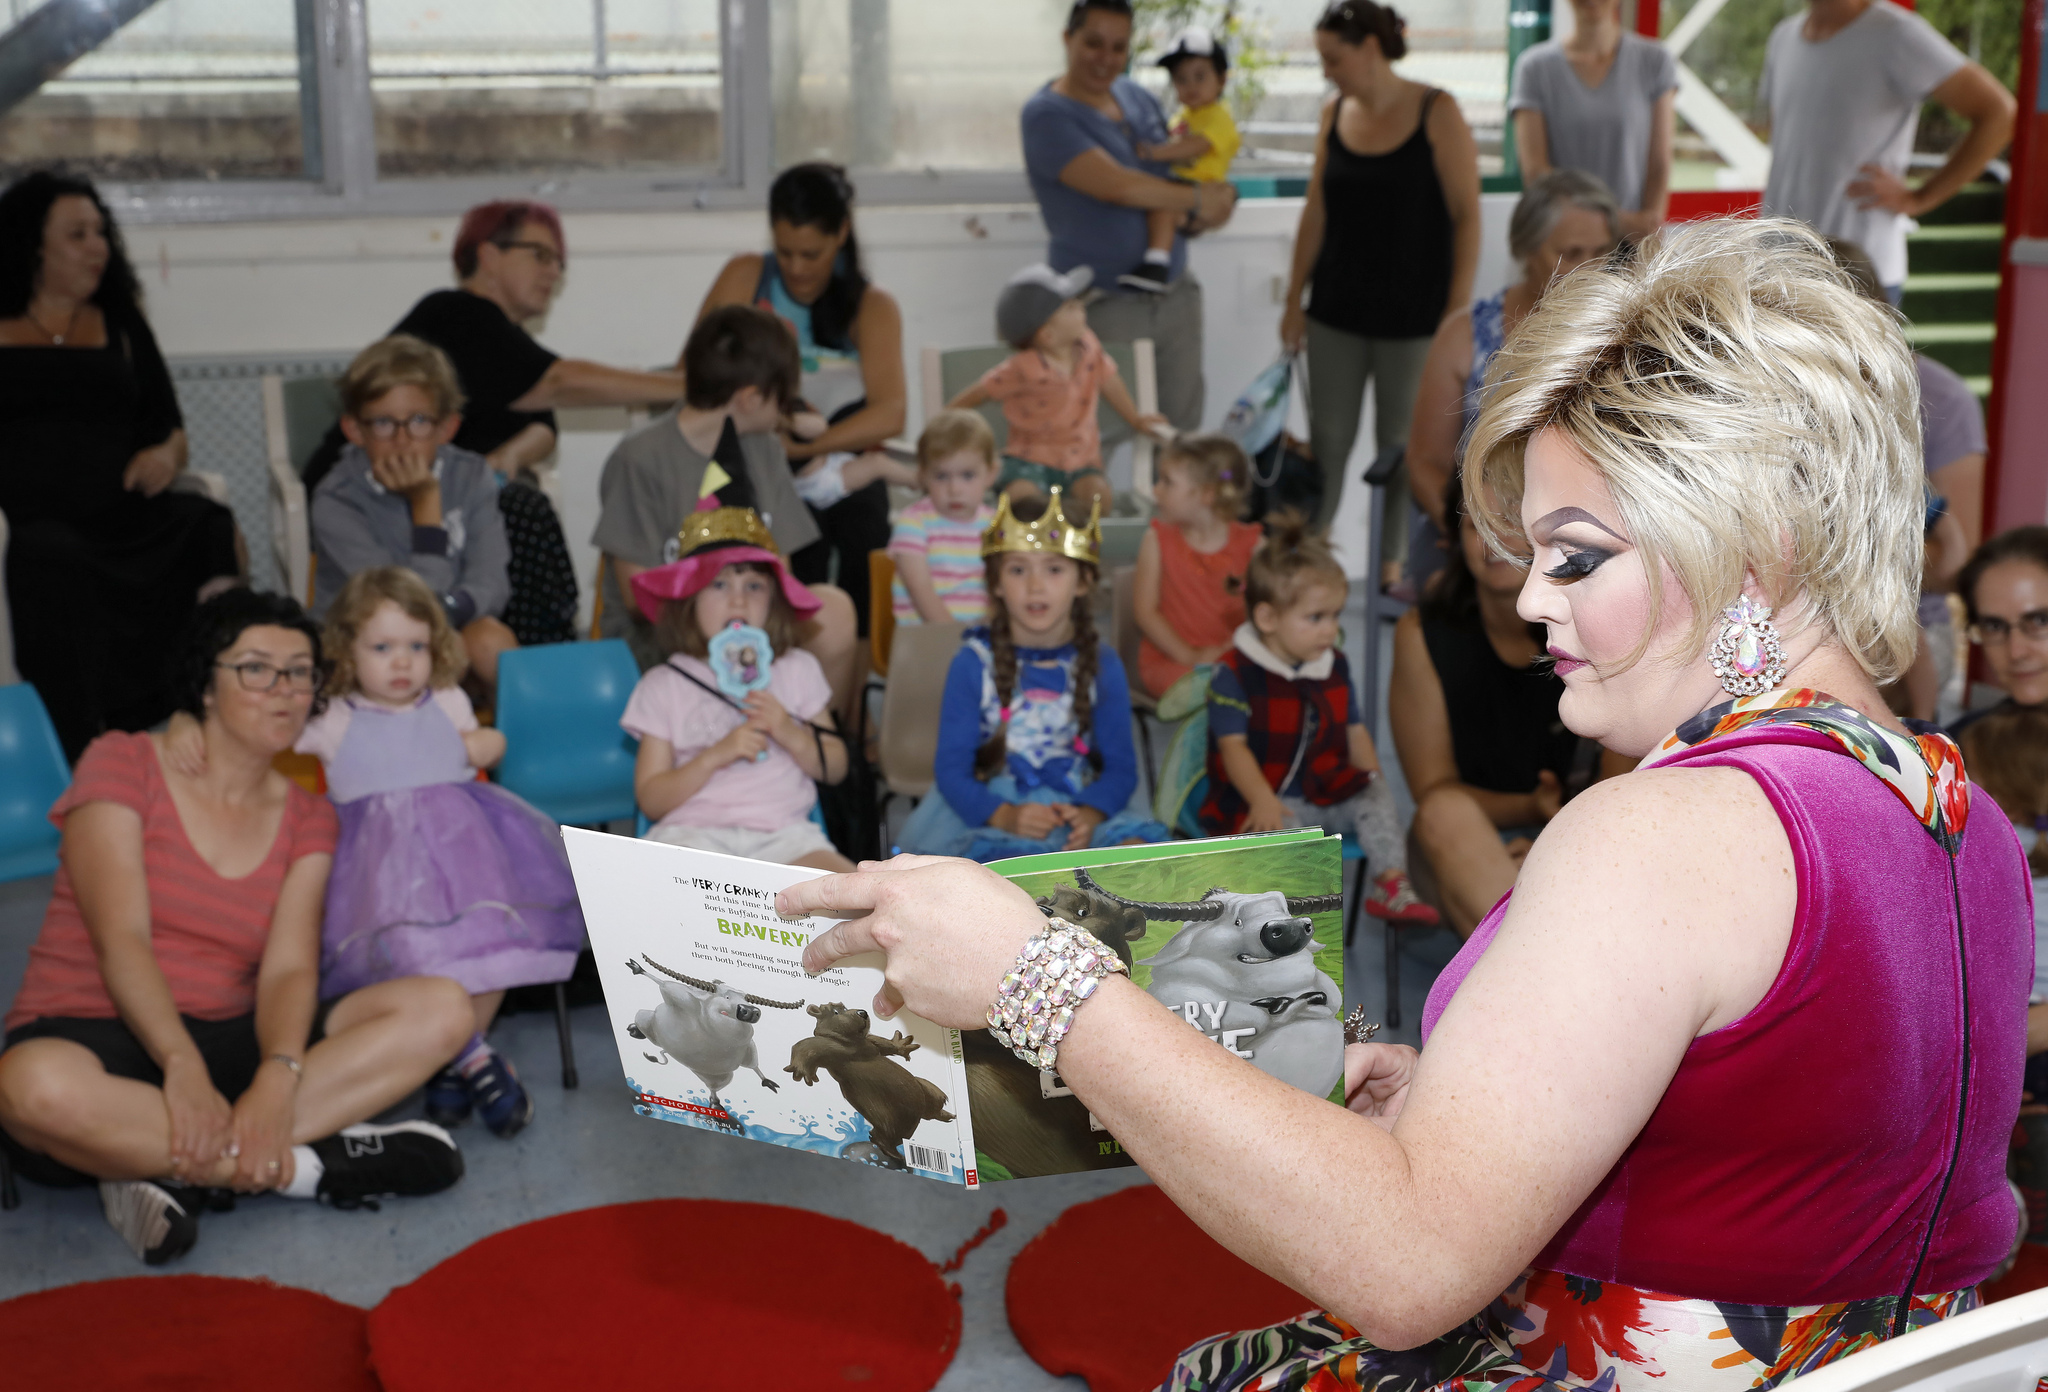 Rainbow family storytime events to be held at libraries across Sydney